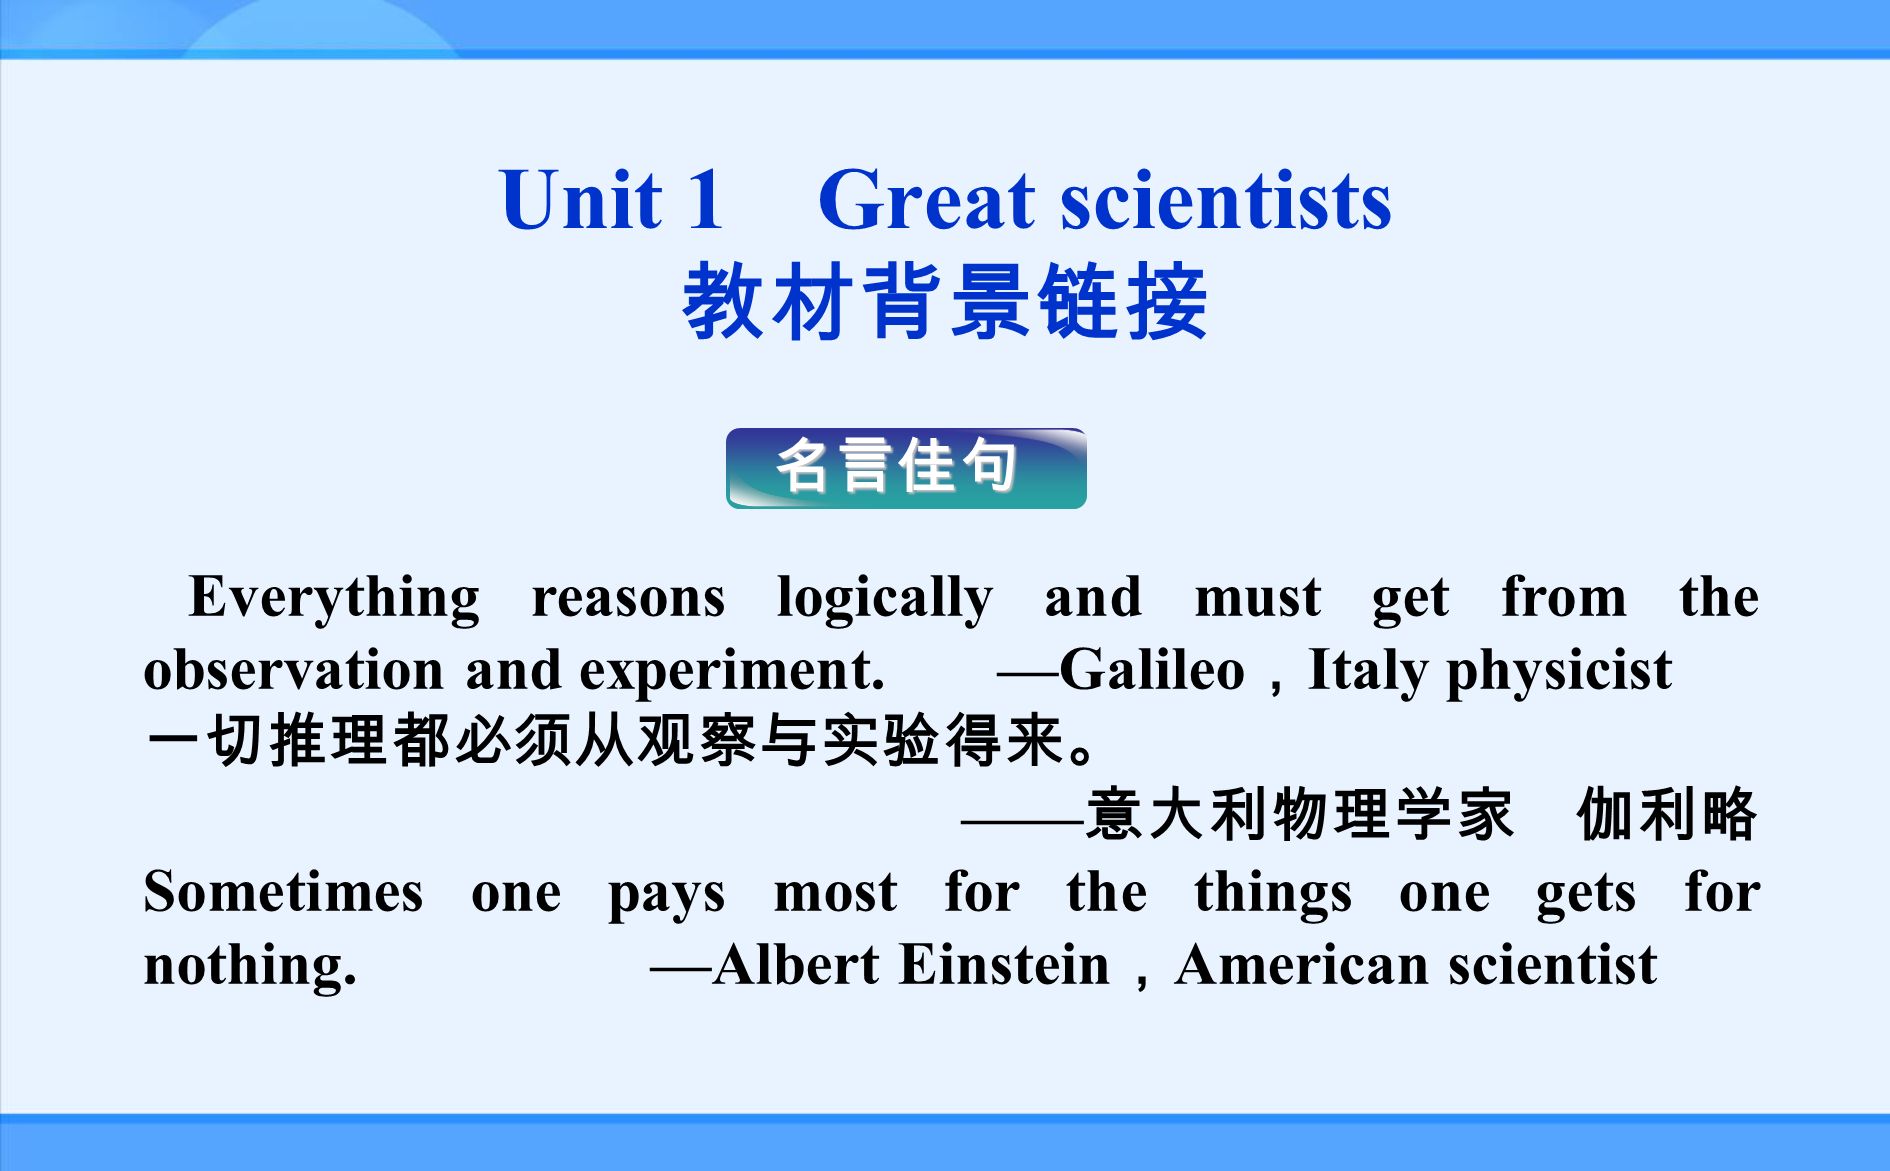 Unit 1 Great Scientists 教材背景高二必修5 Unit 1 Great Scientists 教材背景链接名言佳句everything Reasons Logically And Must Get From The Observation And Experiment Ppt Download